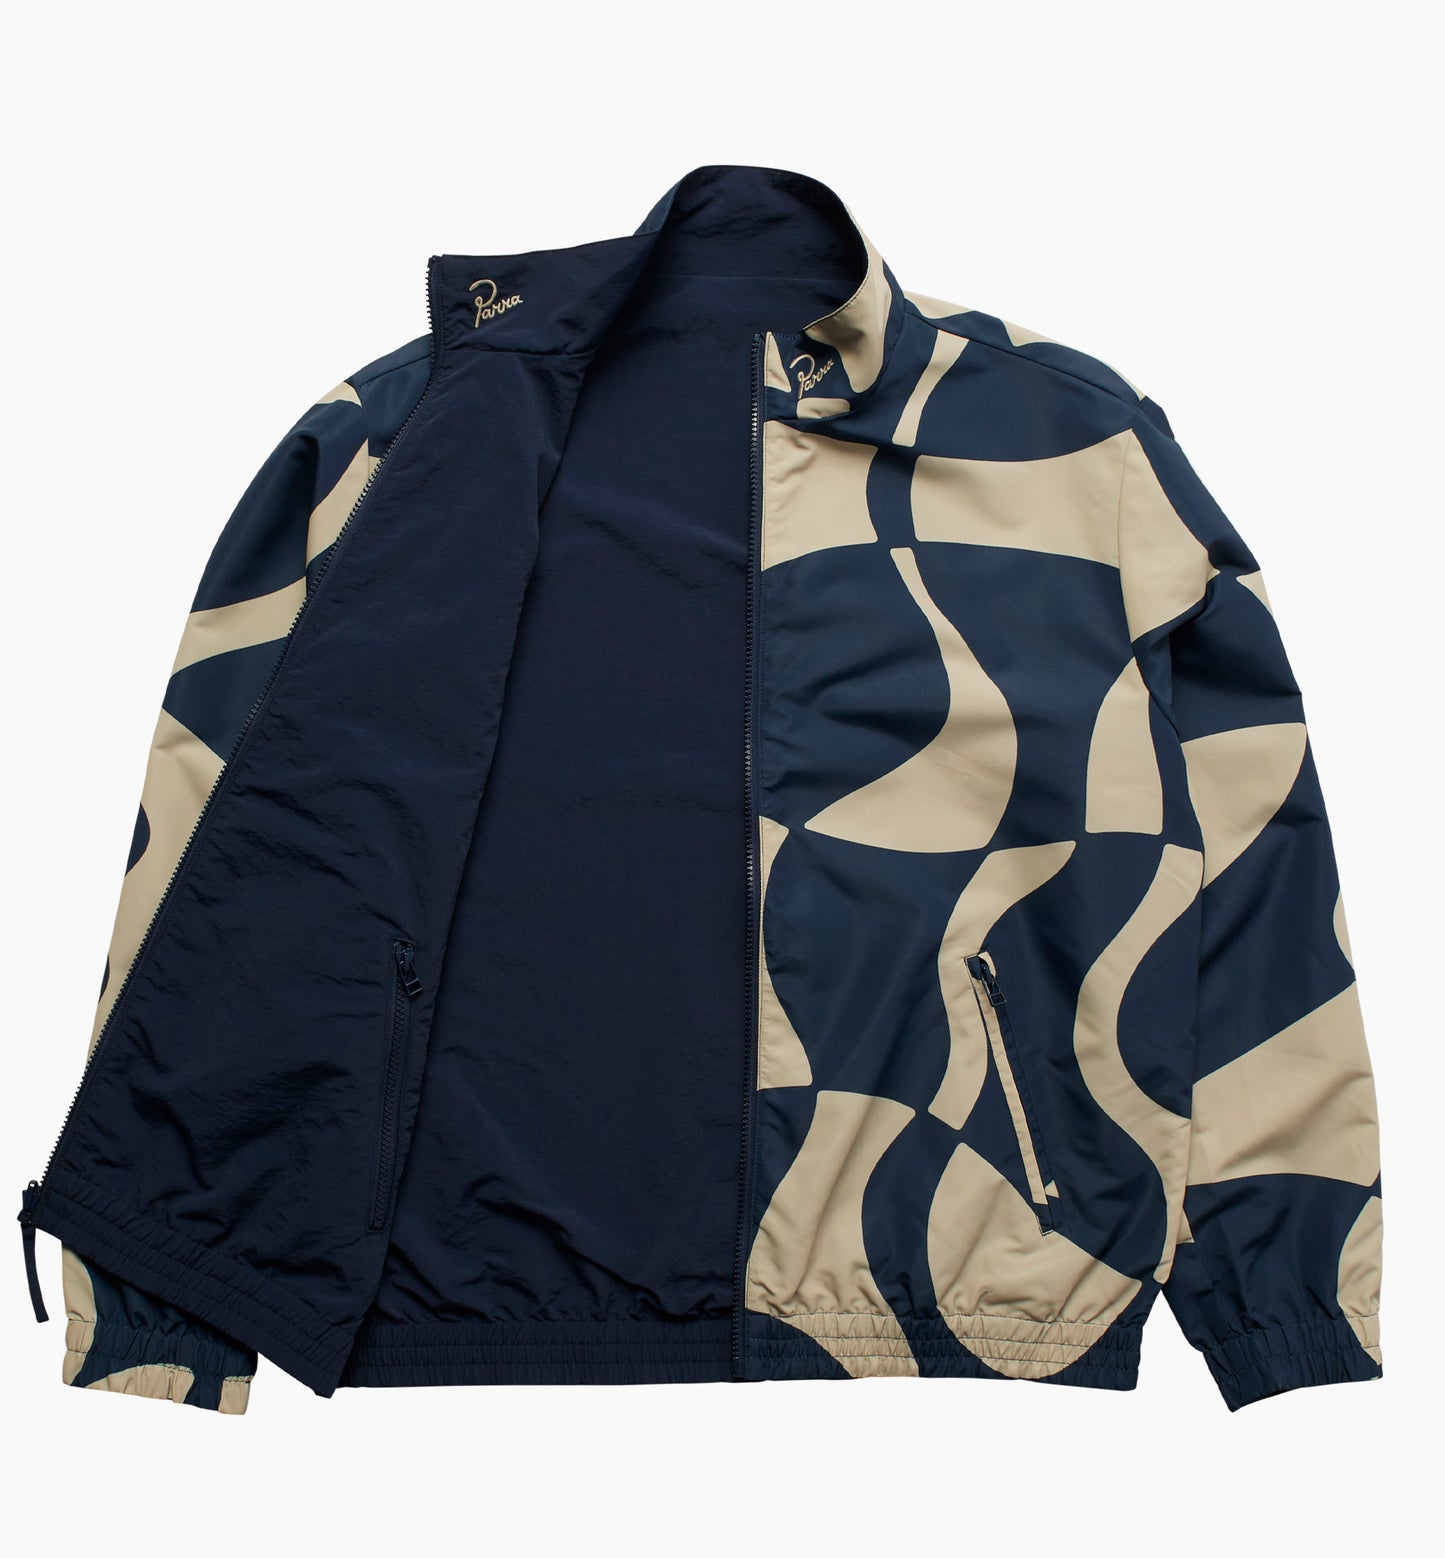 By Parra Zoom Winds Reversible Track Jacket Navyblue